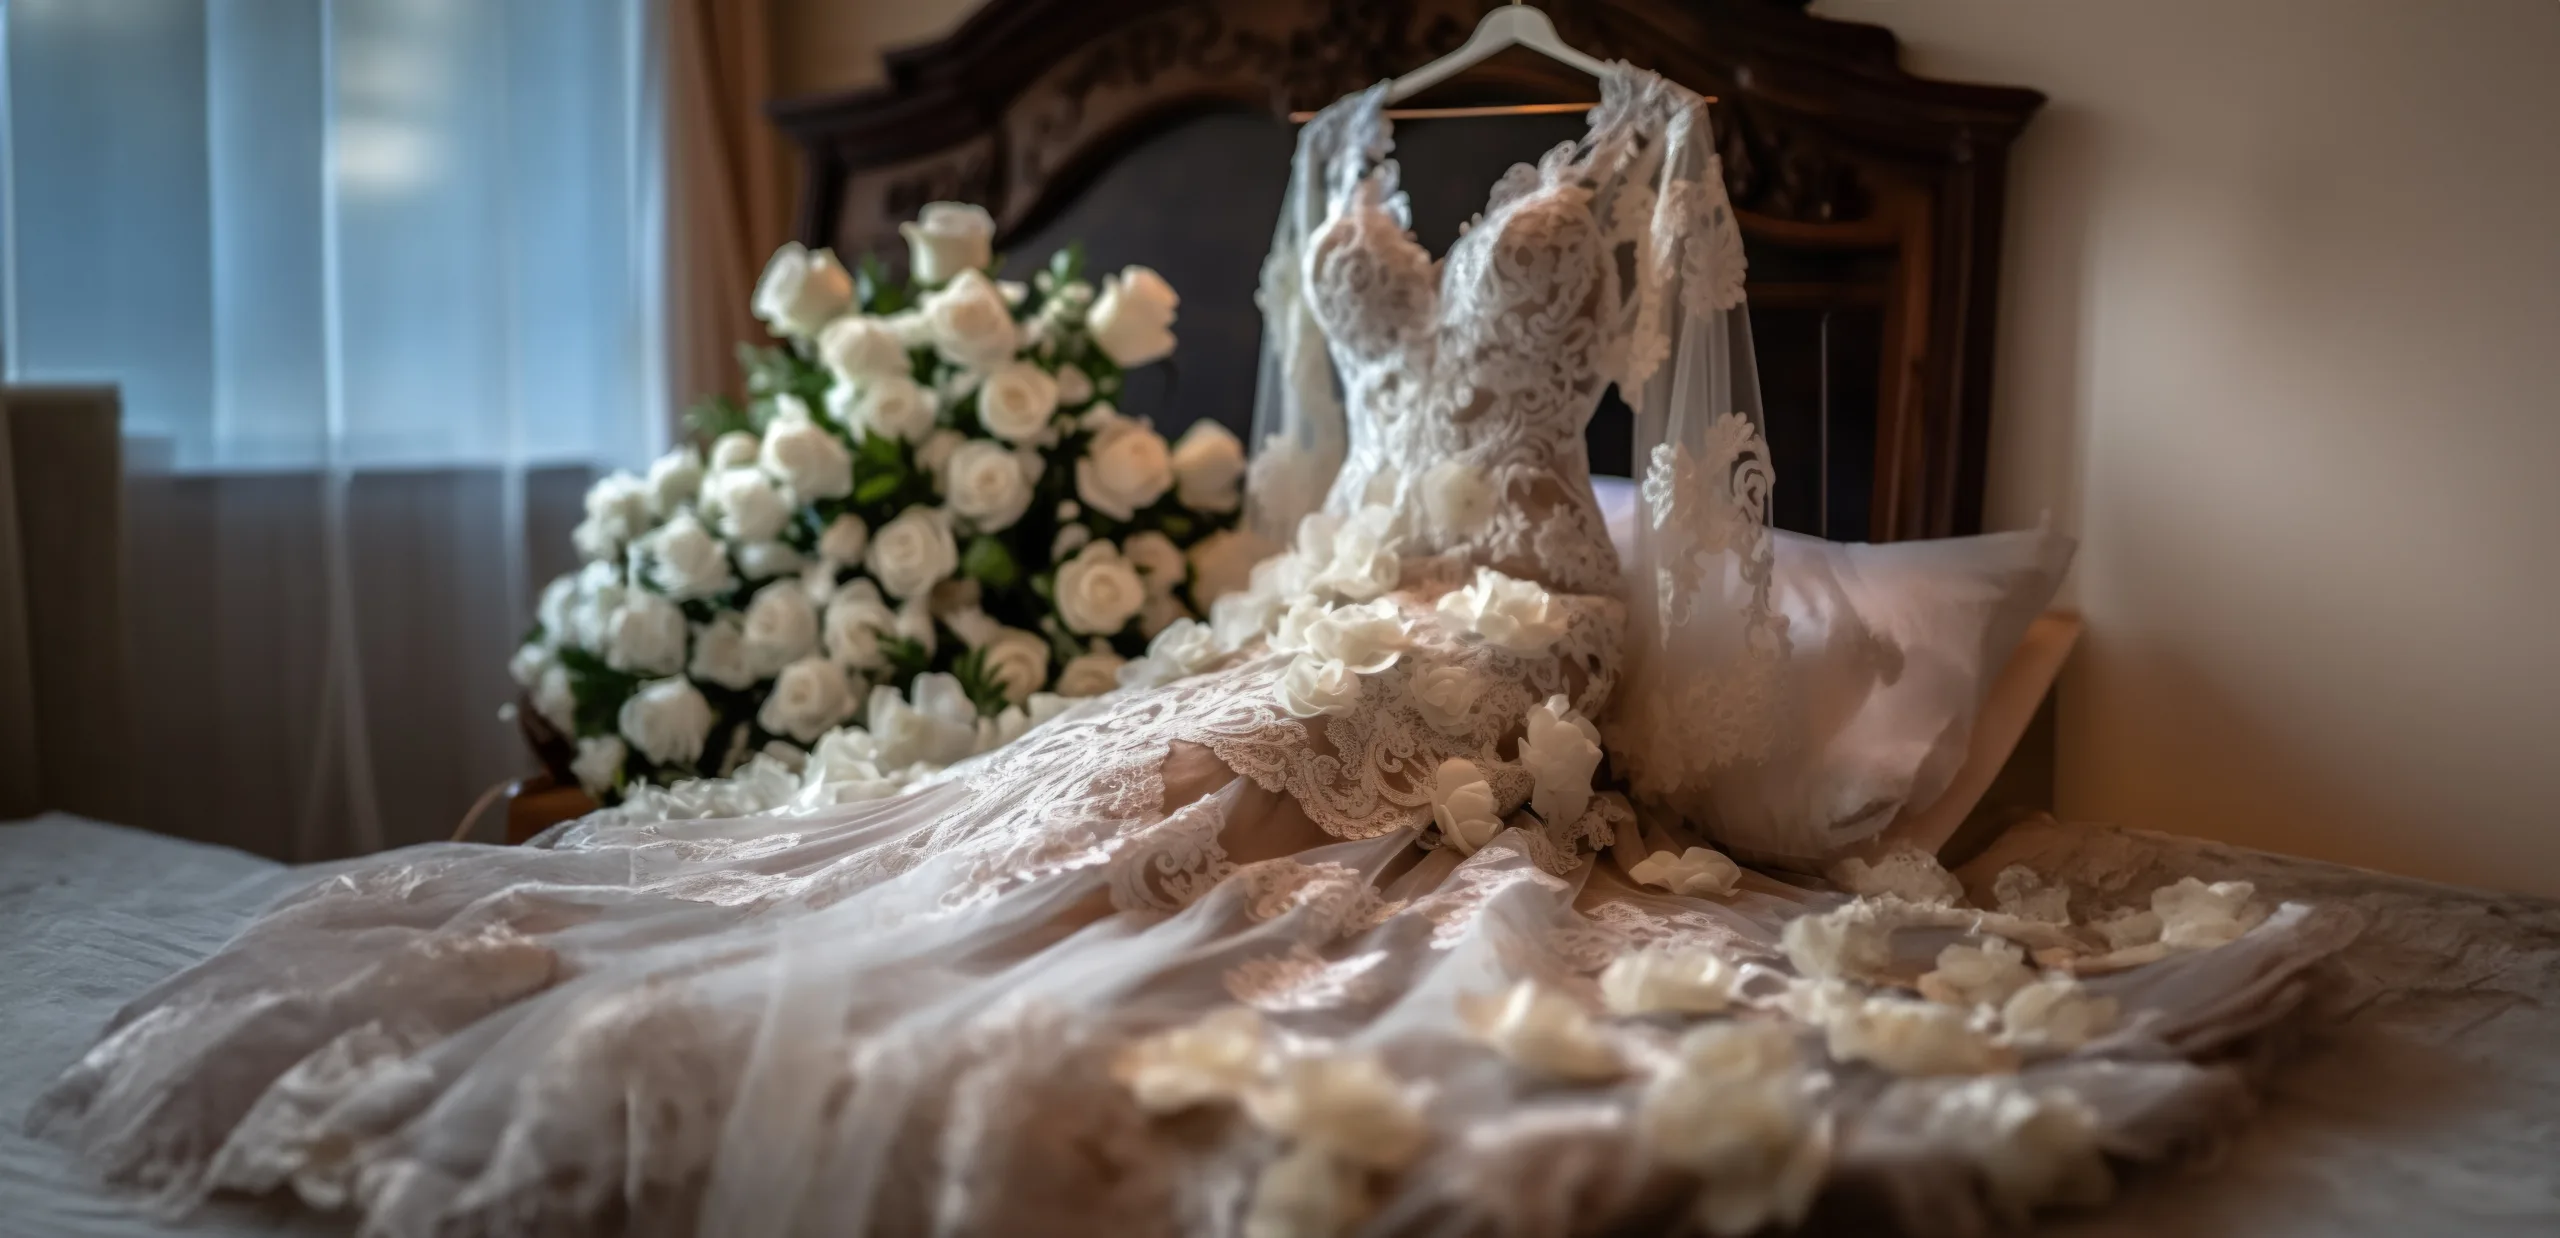 A wedding dress hangs on a bed with flowers.